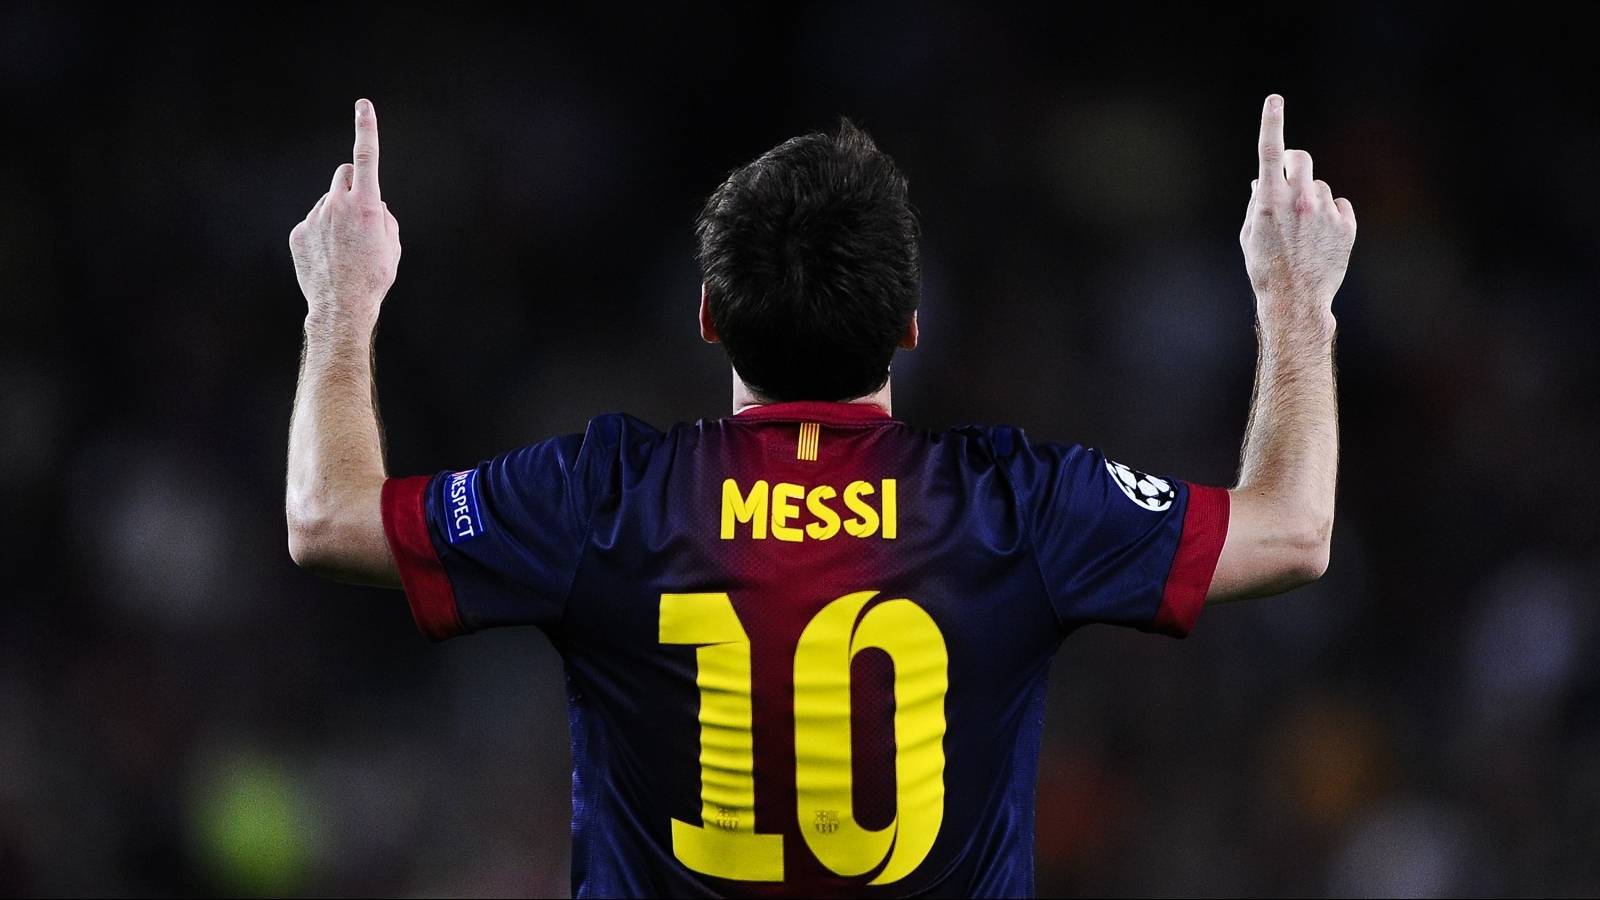 lionel andres messi, people, sports, men, football, black images